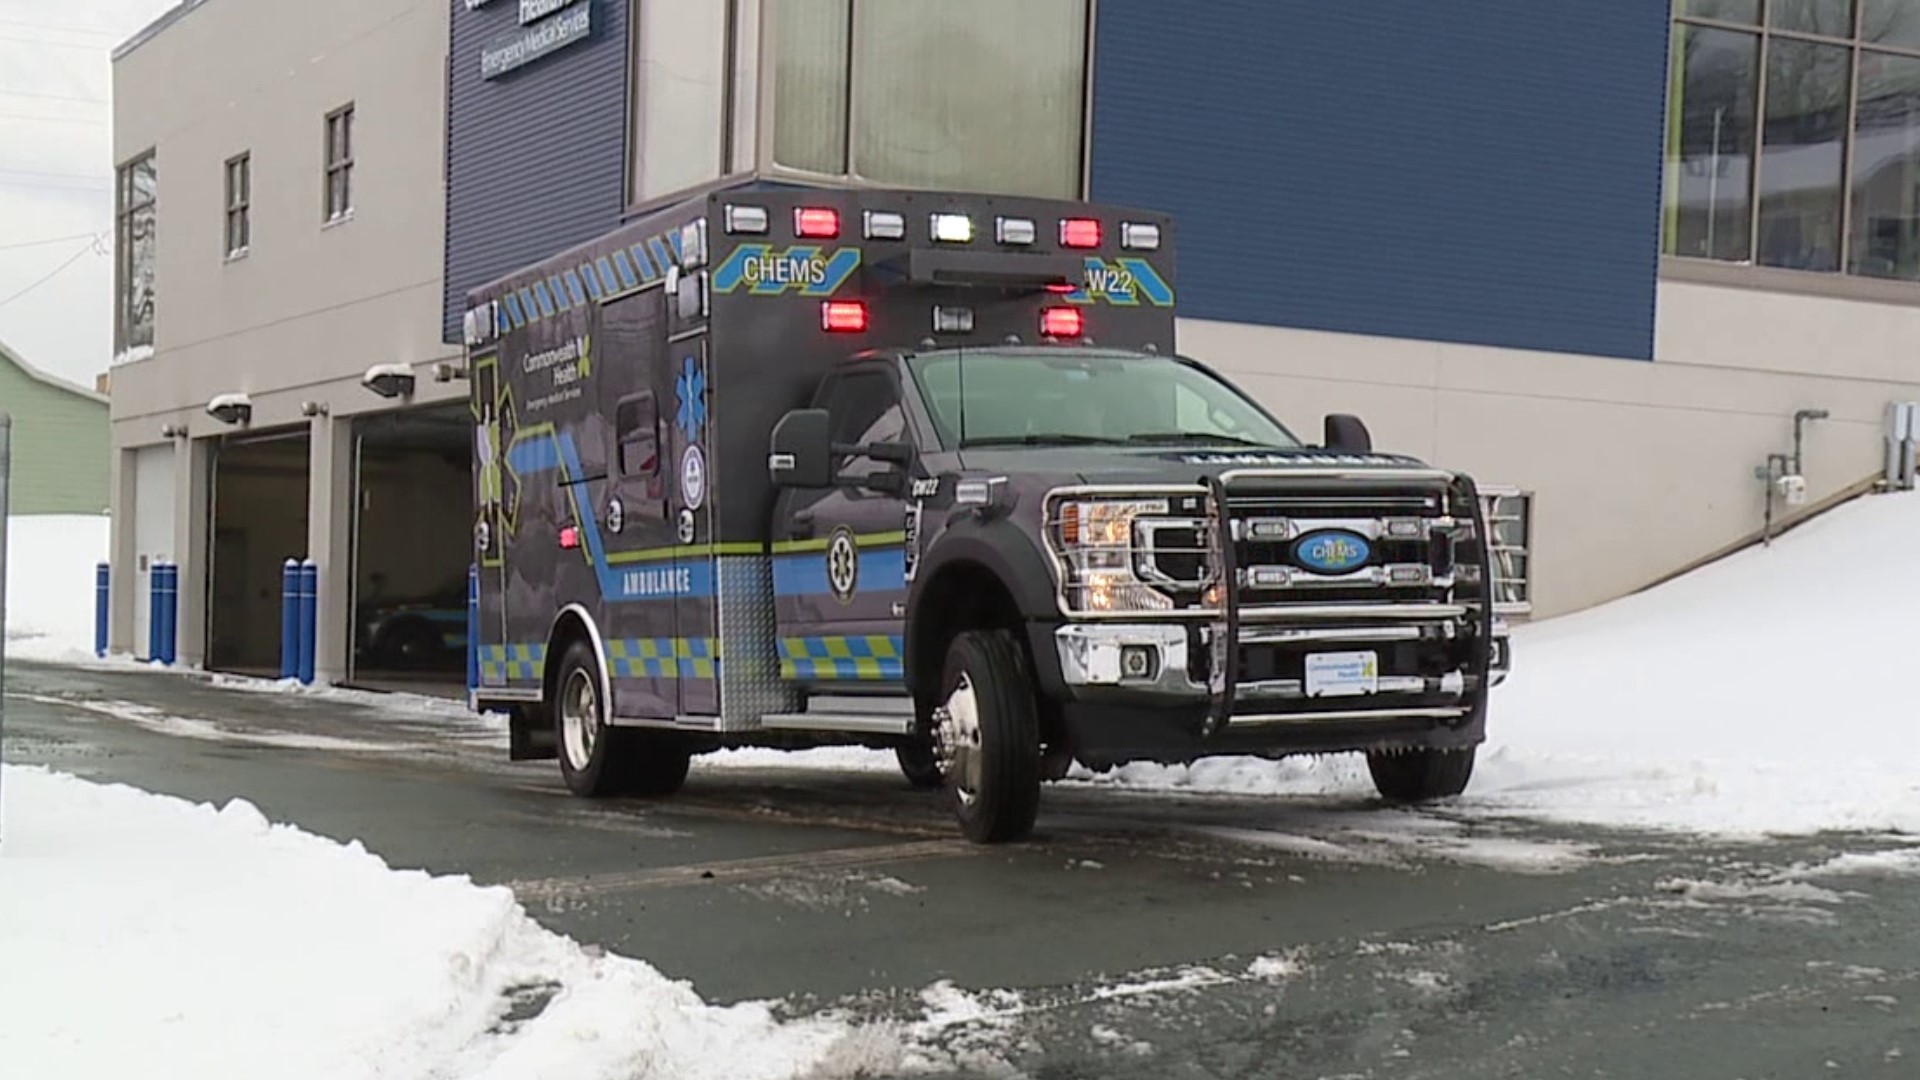 Commonwealth Health in northeastern Pennsylvania is investing in something new to help their EMTs get around better in bad weather.